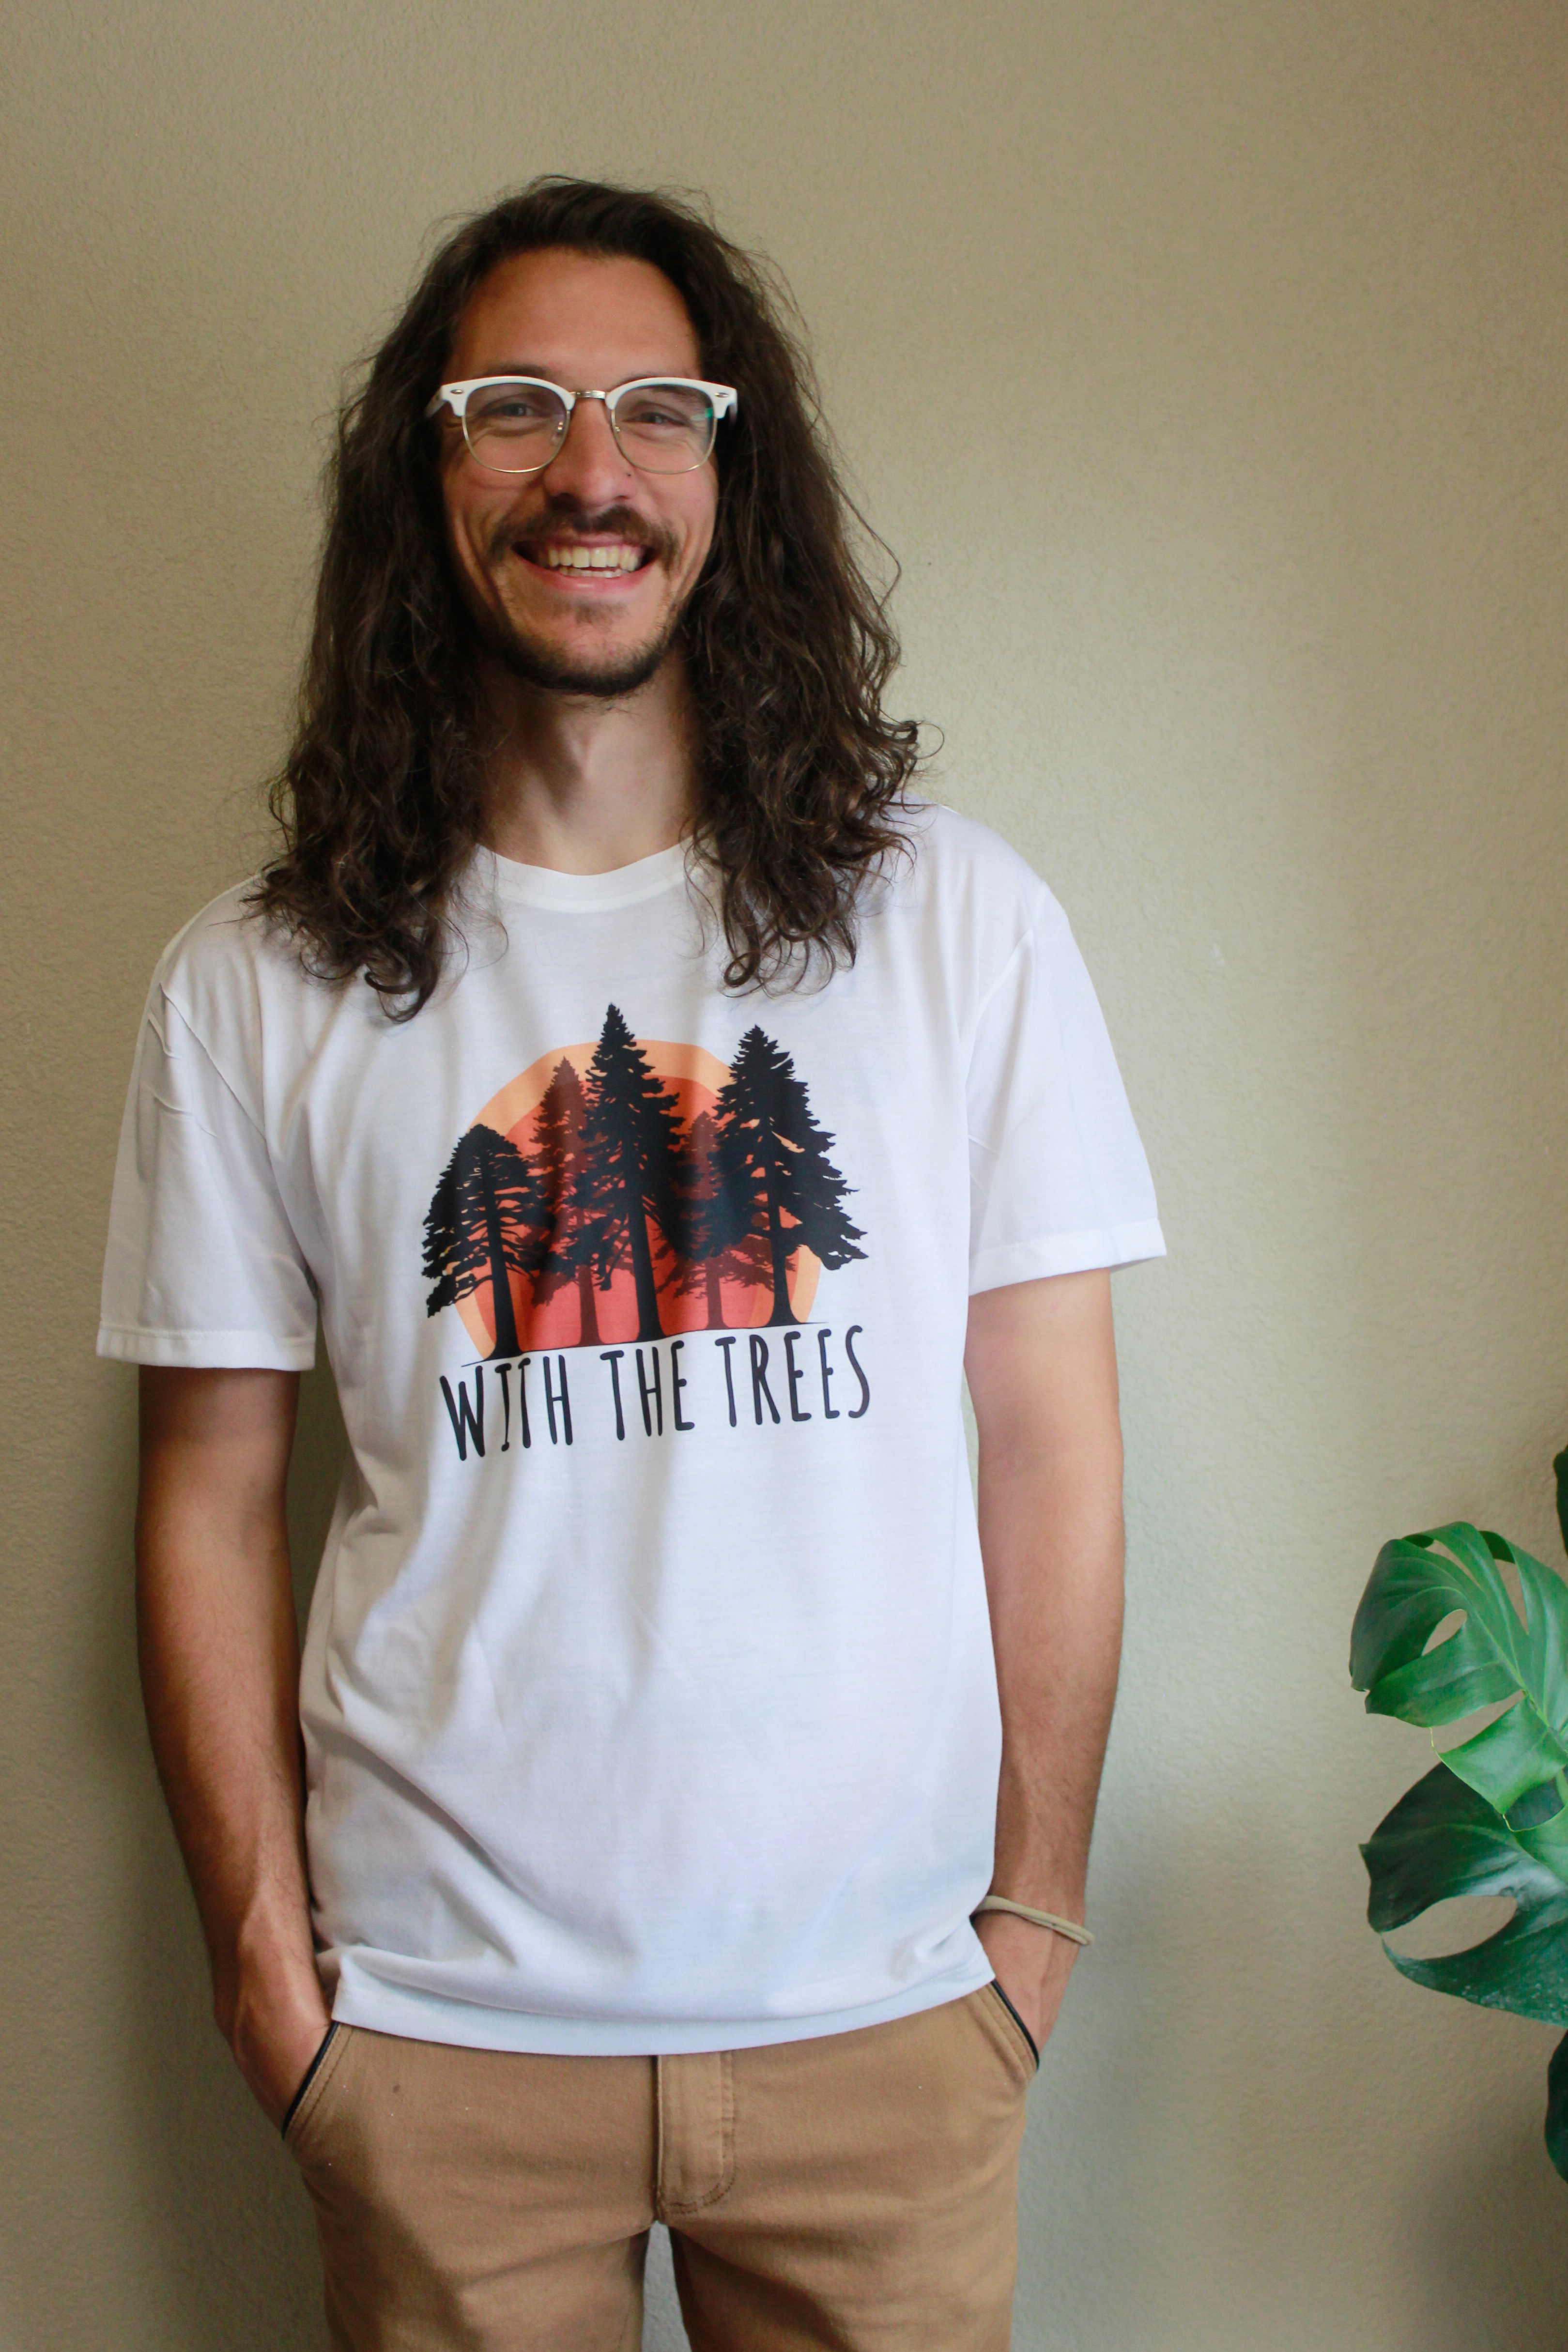 tee design of a sunset and trees with a with the trees logo design in colorful red and orange hues